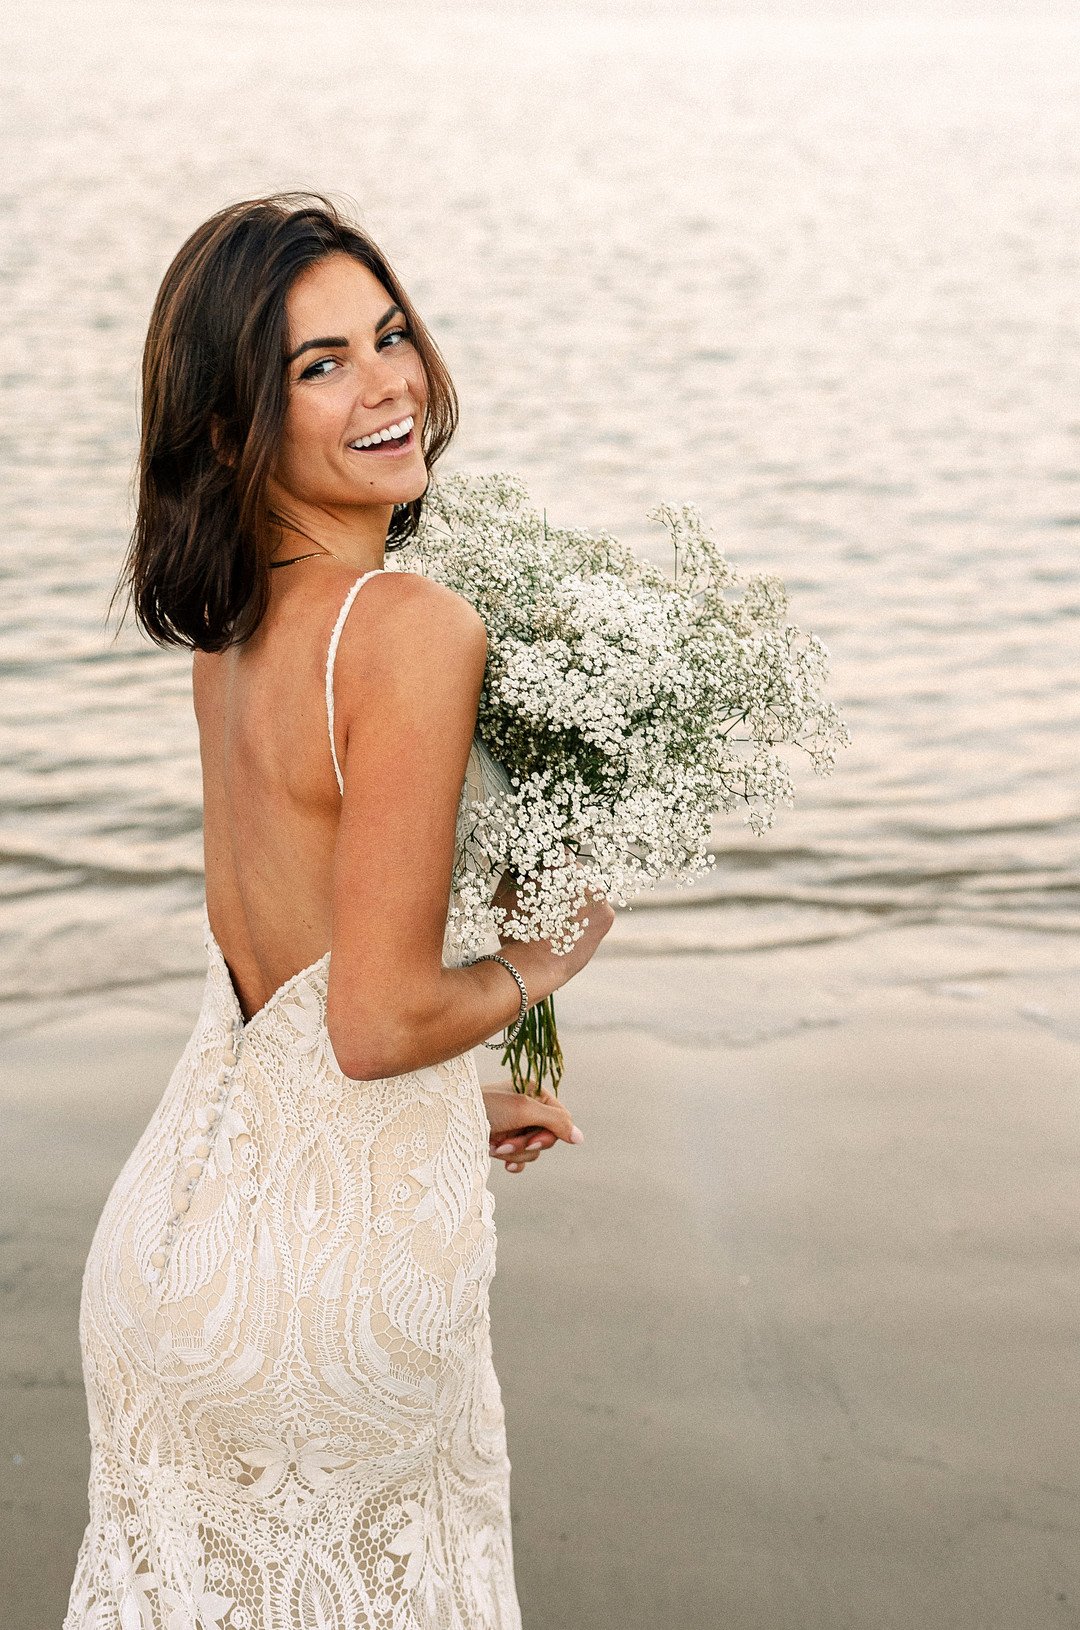 A beachy bridal moment_Carly Terry Photography_AW BRIDAL-1604_low.jpg